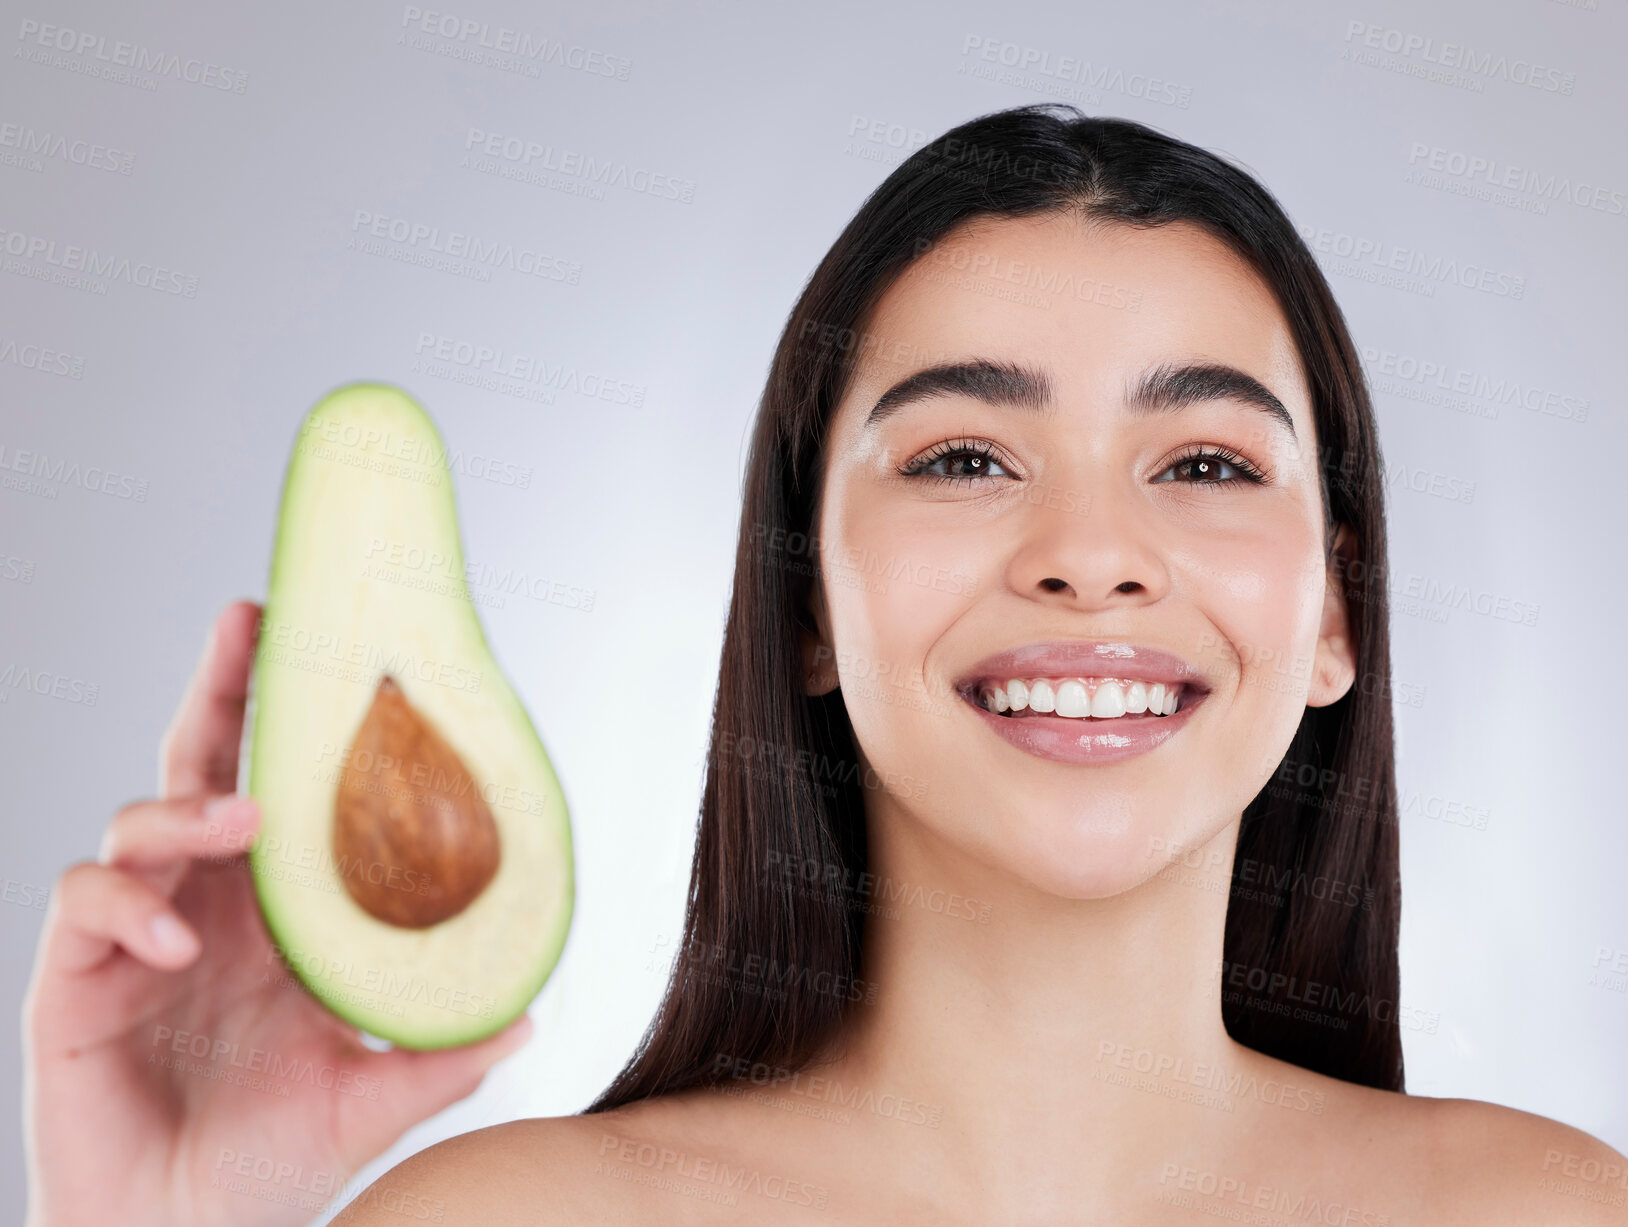 Buy stock photo Studio portrait of an attractive young woman posing with an avocado against a grey background